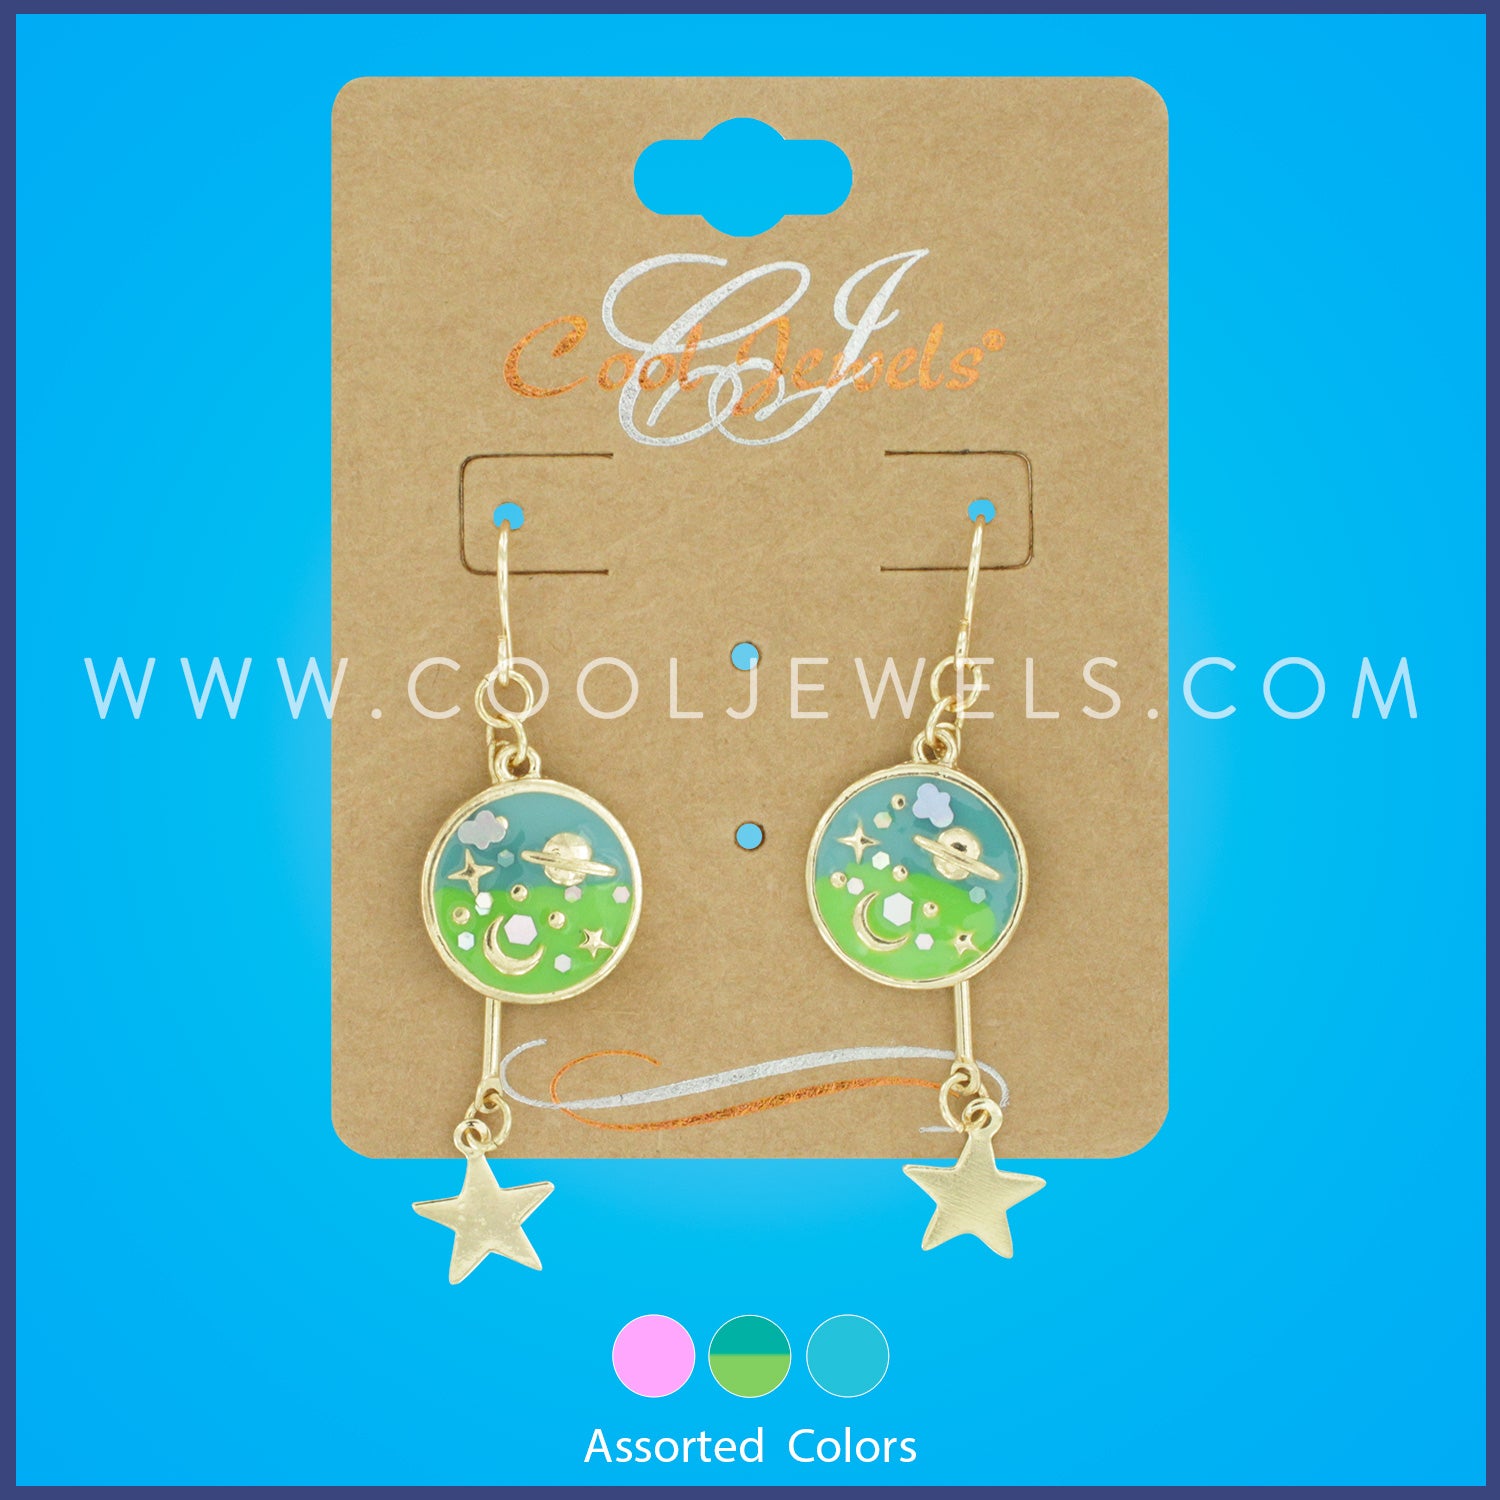 GOLD FISH HOOK EARRING WITH ROUND SPACE PENDANT WITH DANGLING STARS OR PLANETS - ASSORTED